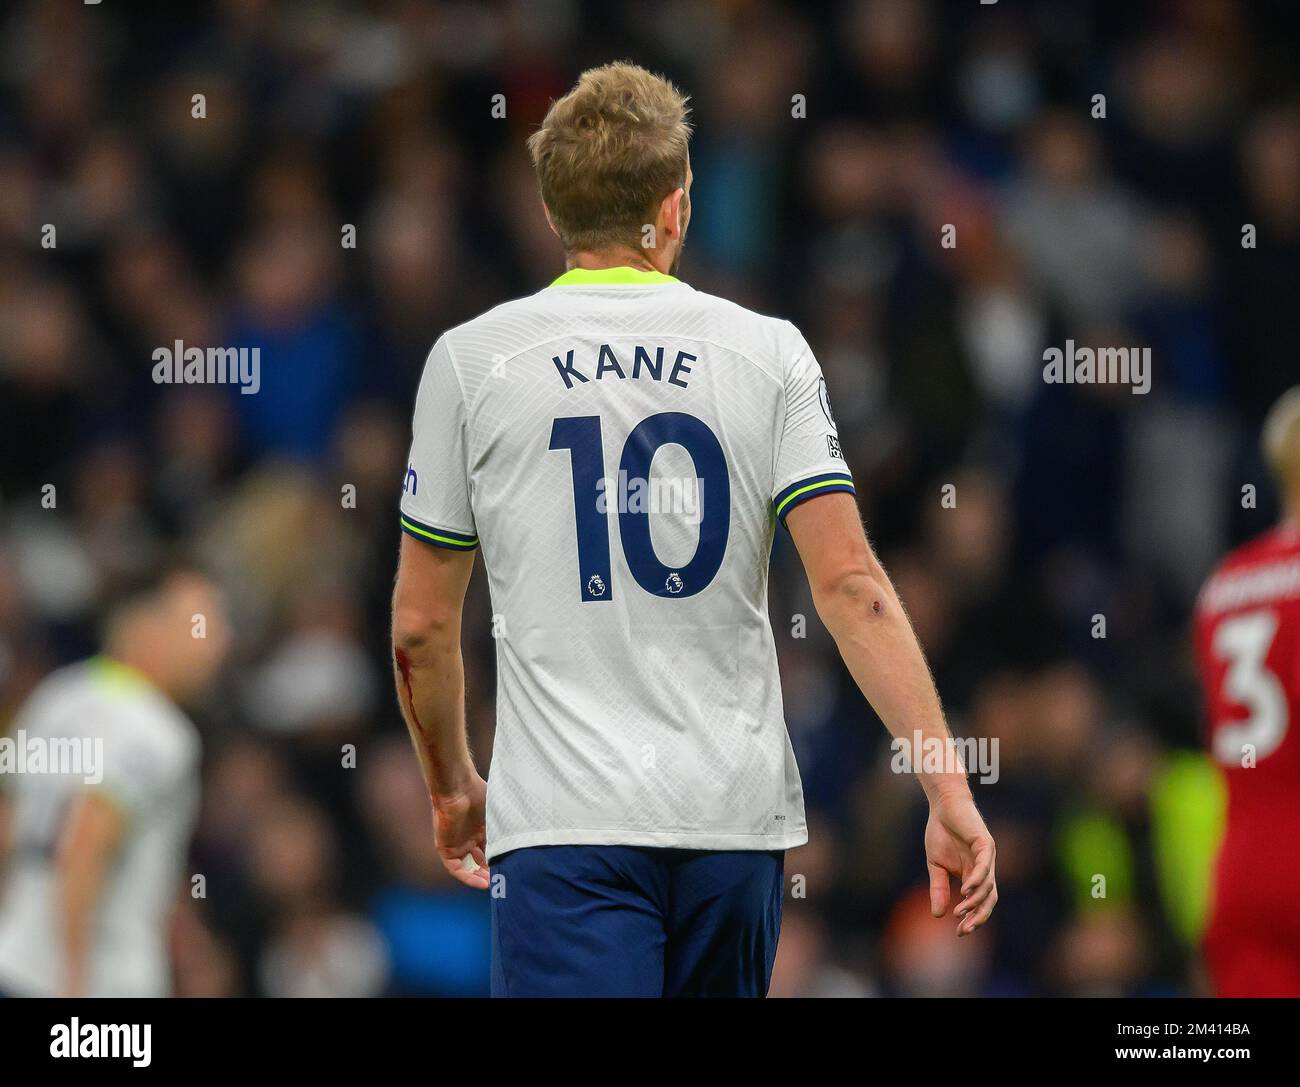 06 Nov 2022 - Tottenham Hotspur v Liverpool - Premier League - Tottenham Hotspur Stadium  Tottenham's Harry Kane during the match against Liverpool. Picture : Mark Pain / Alamy Stock Photo